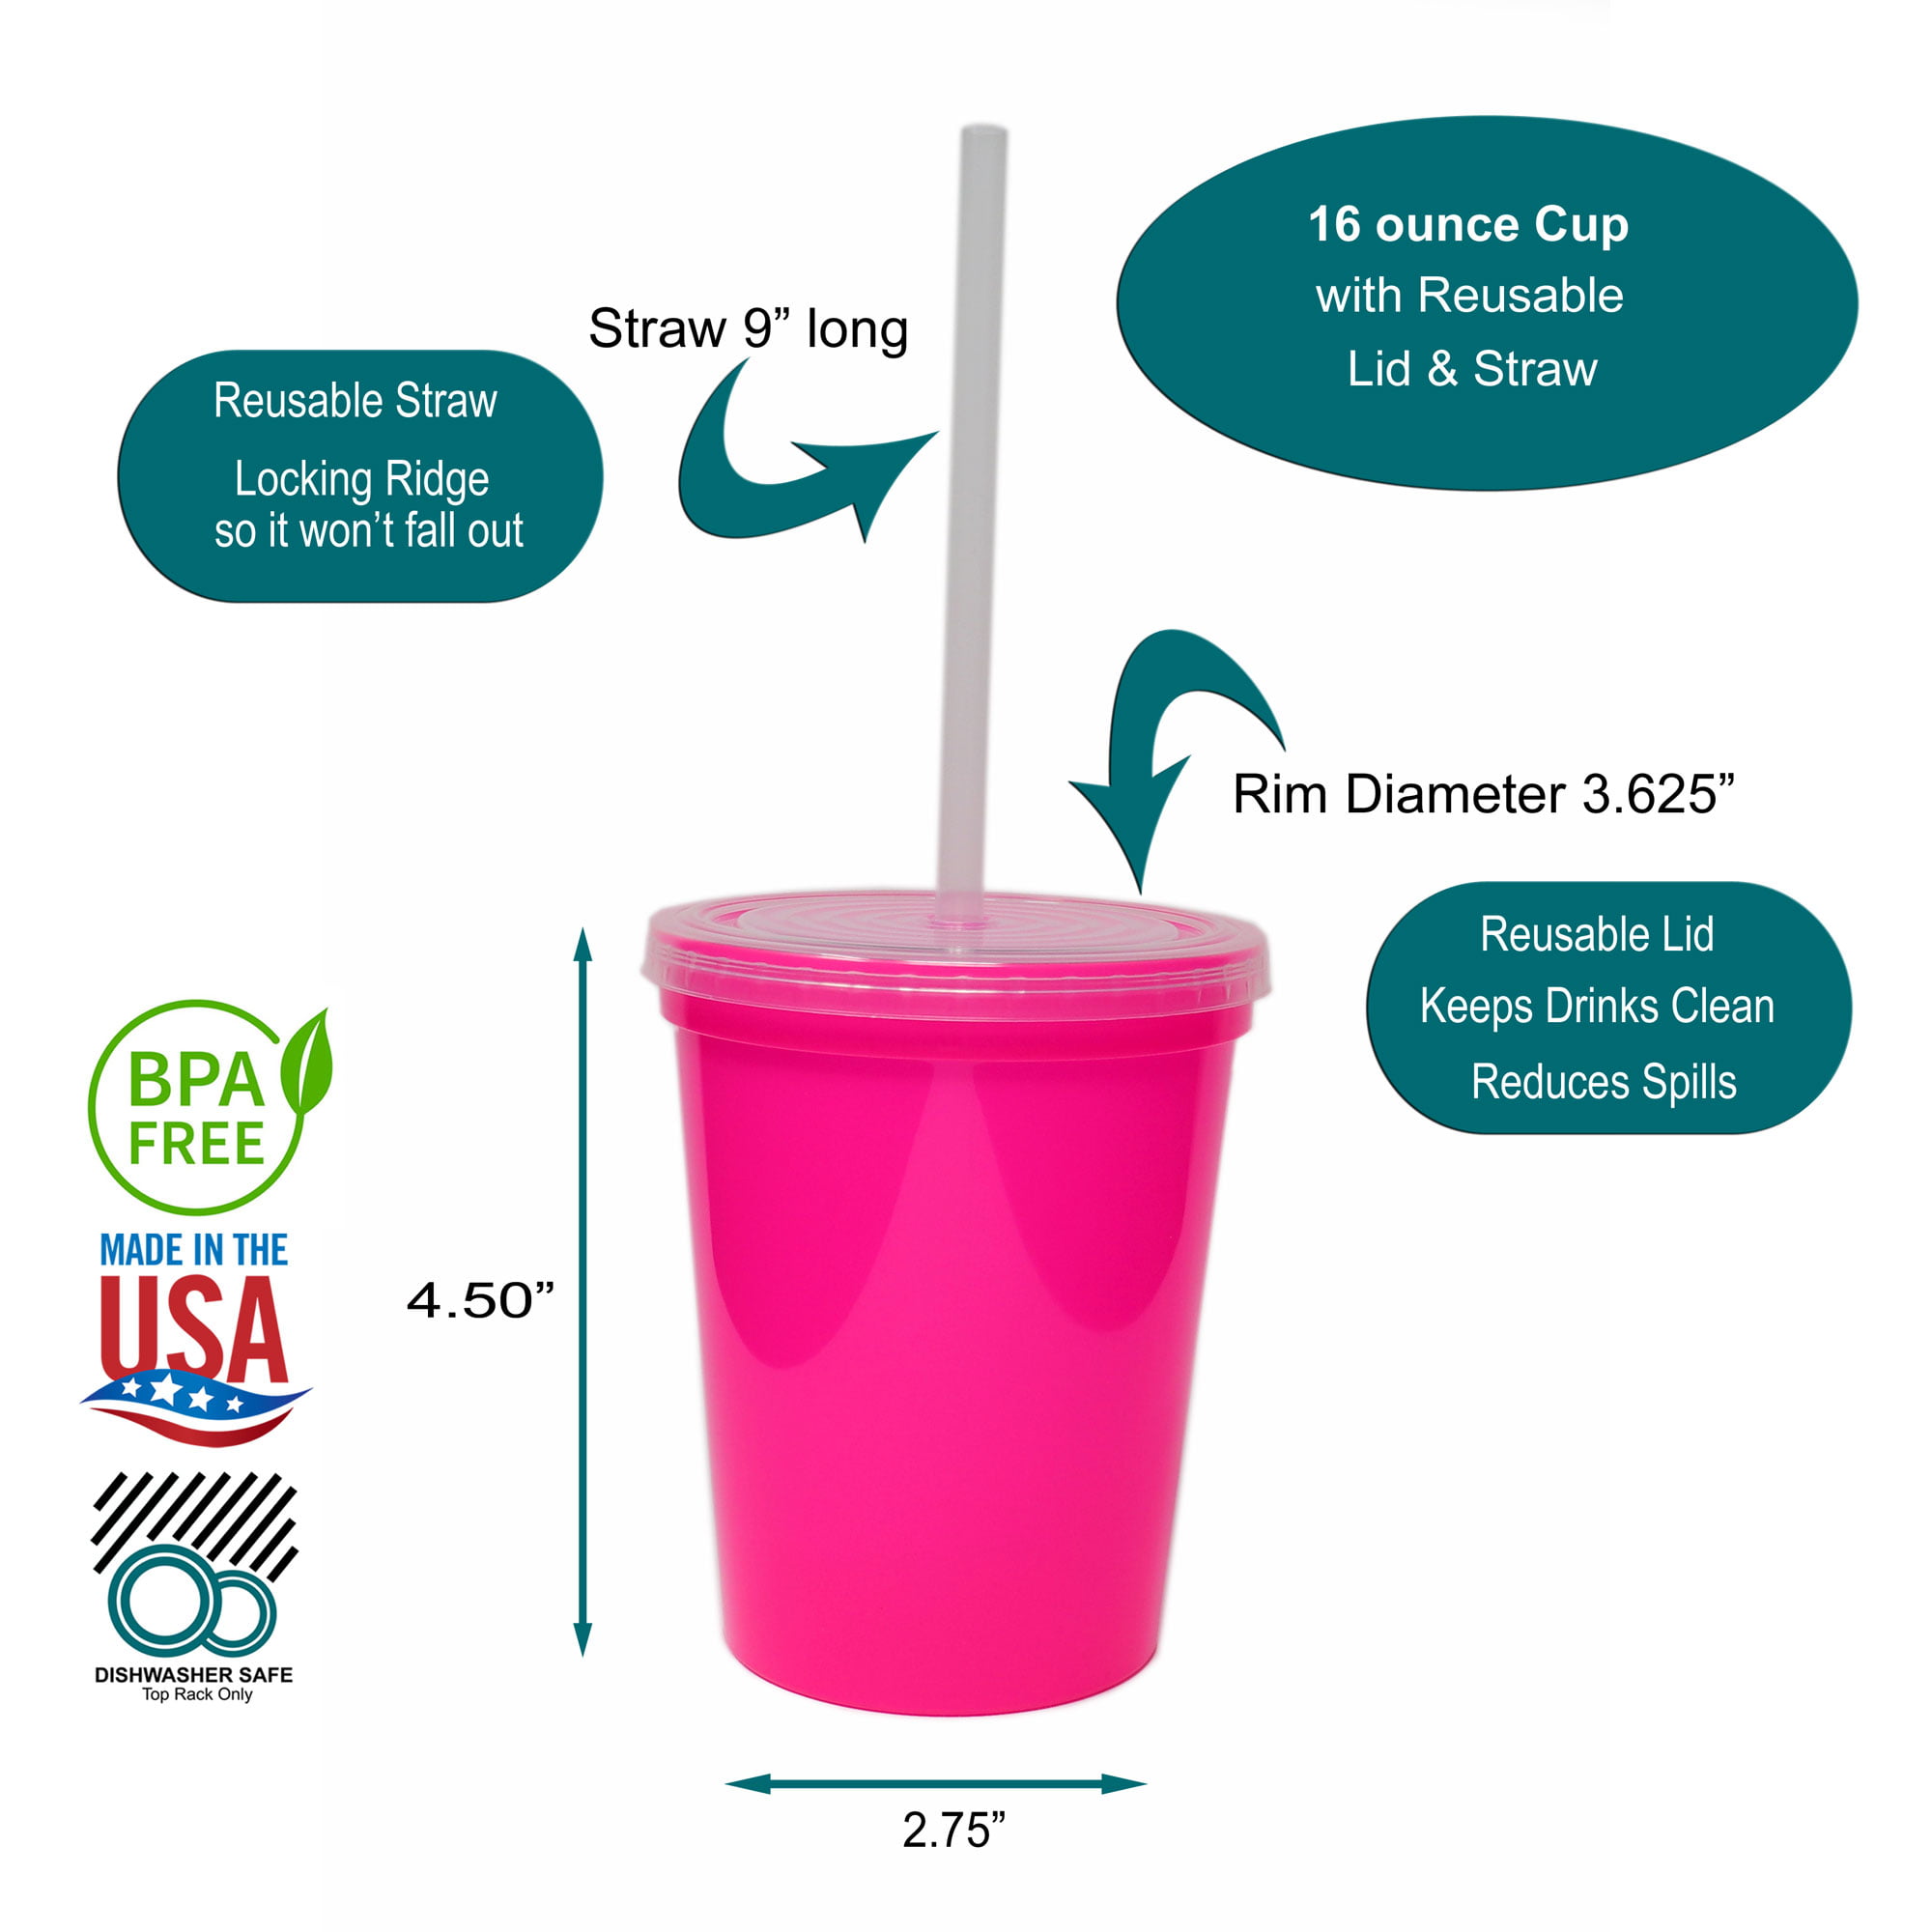 HotSips Reusable Drinking Straws Ergonomic Shape Made in USA for All Tumblers & Cups 12-40 oz Use in Cold or Hot Beverages, Coffee and Tea, Portable